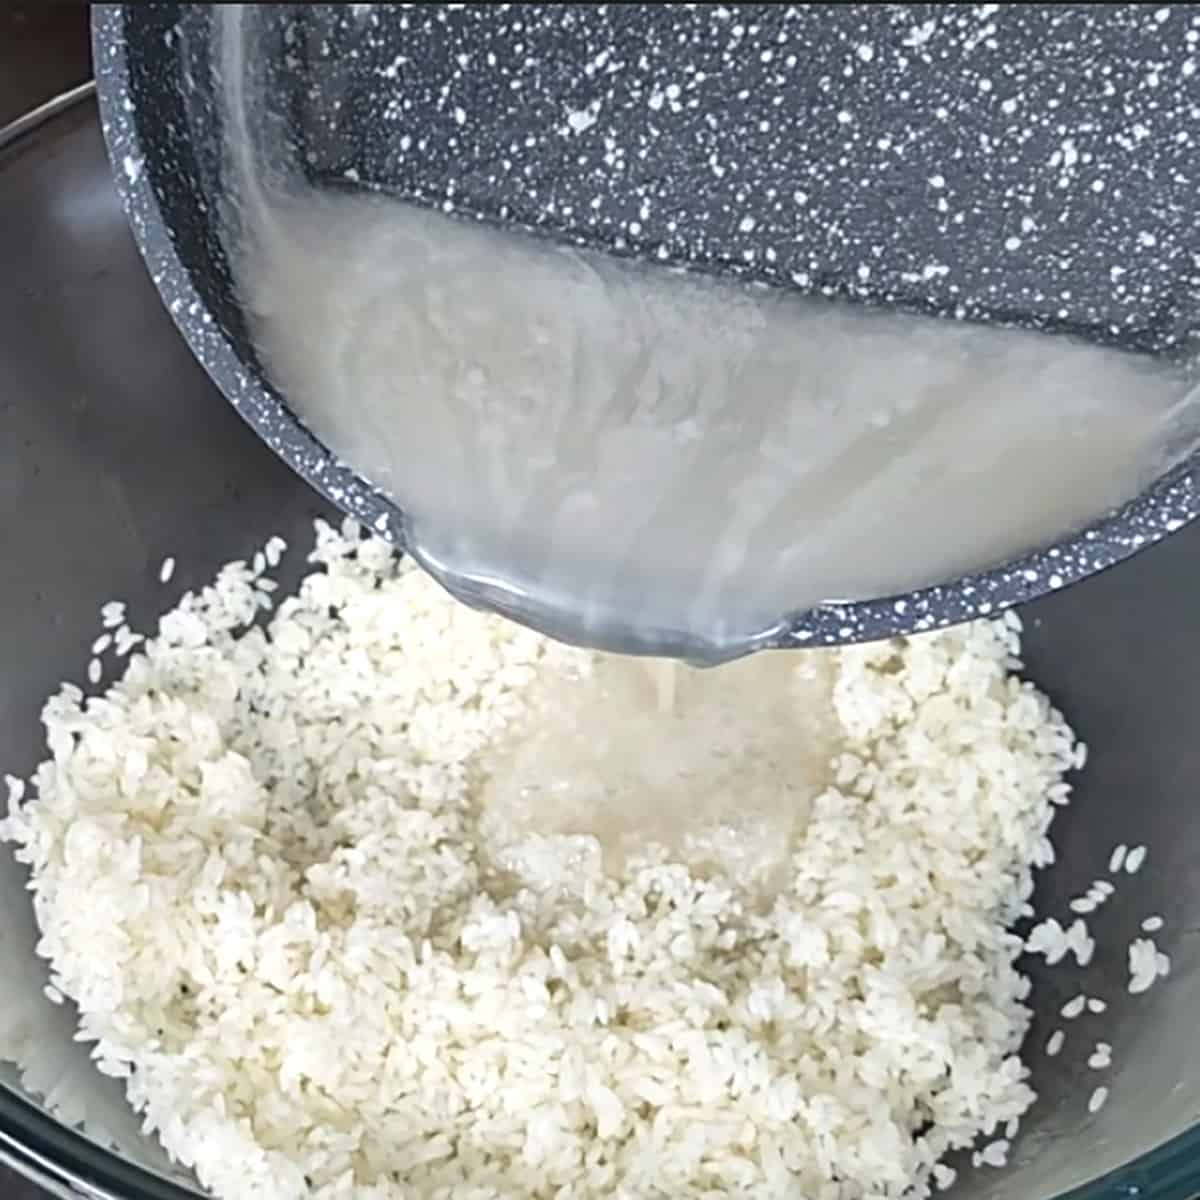 Pour the sweetened coconut syrup into the glass bowl containing cooked sticky rice. 